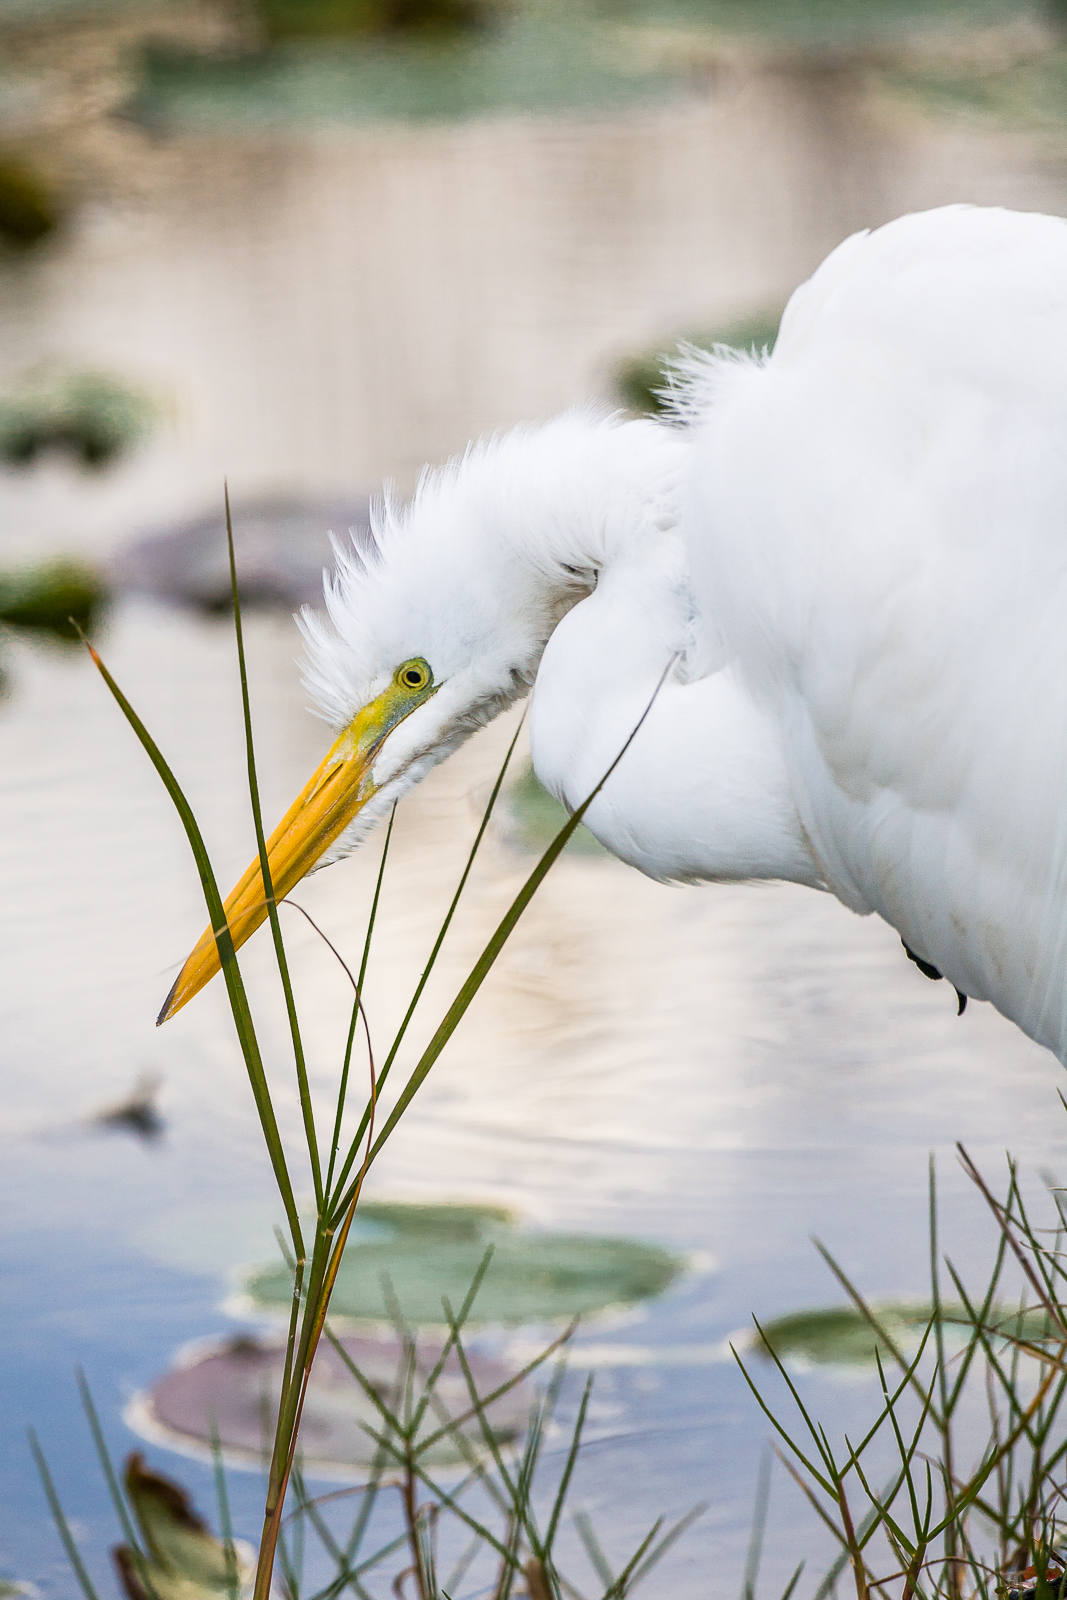 Looking intensely for that morning catch the Great White Egret is determined to feast today.